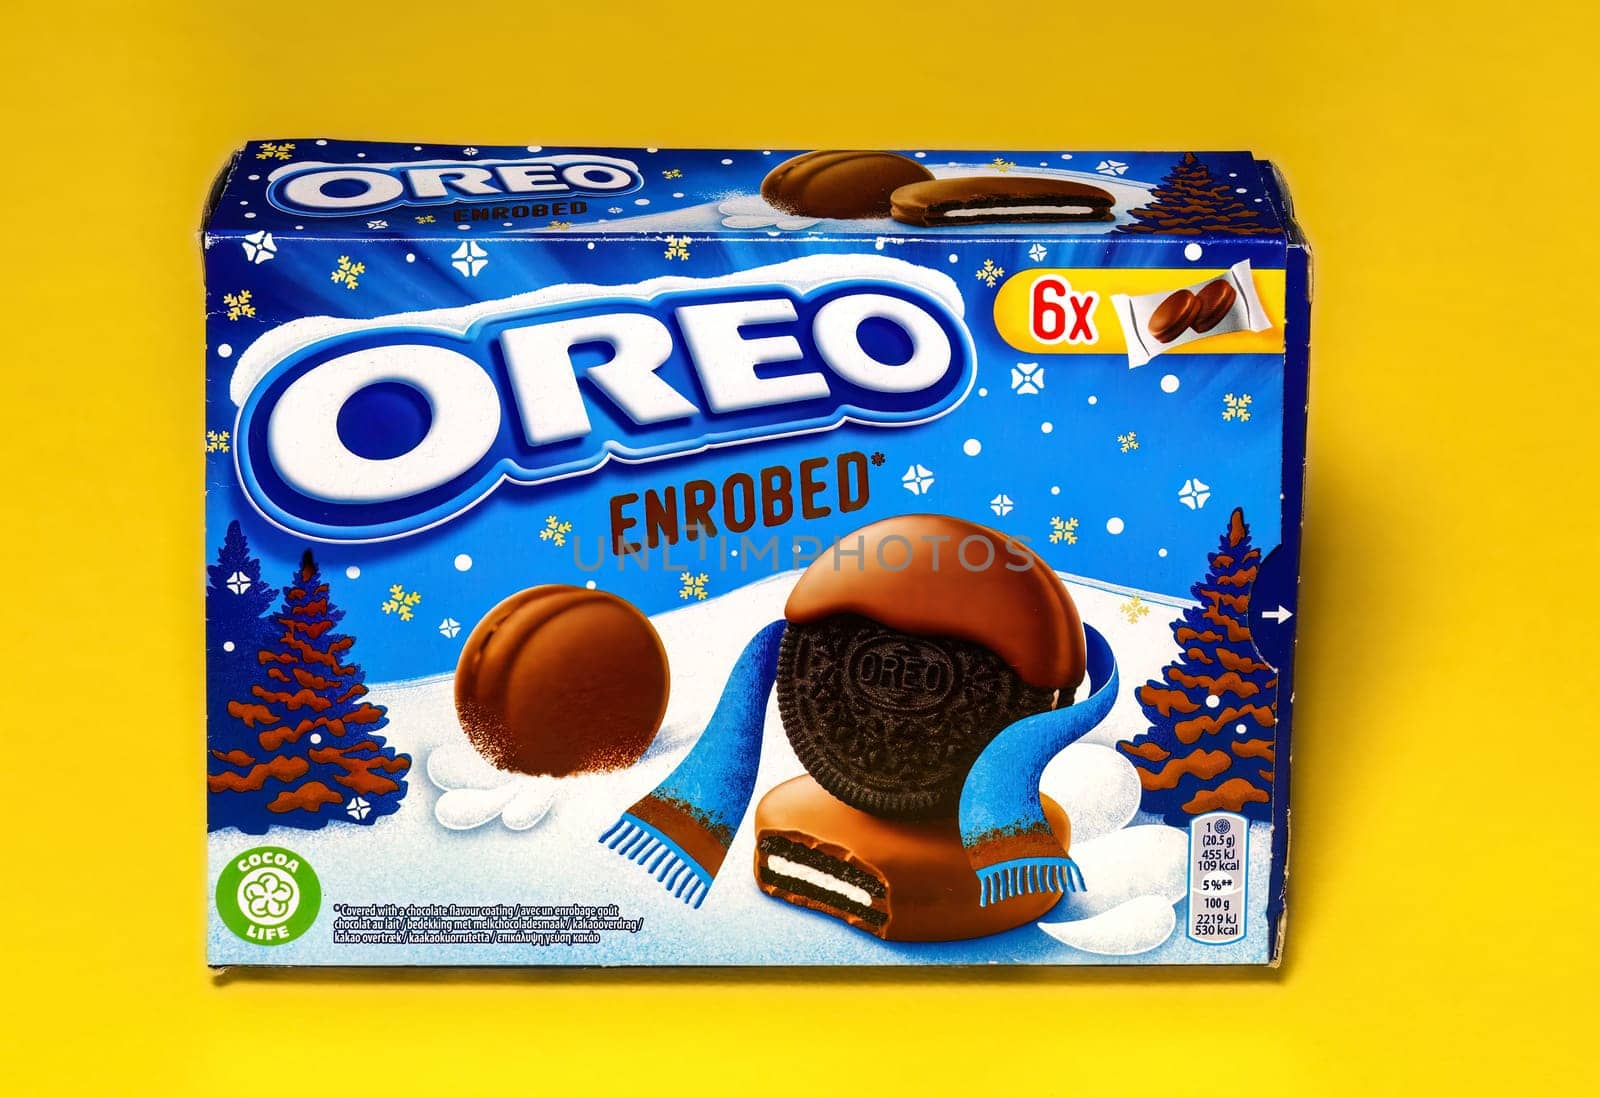 Oreo Enrobed, a classic cookie variation dessert of a biscuit with creamy chocolate on the packaging with nutrition details against a yellow background.